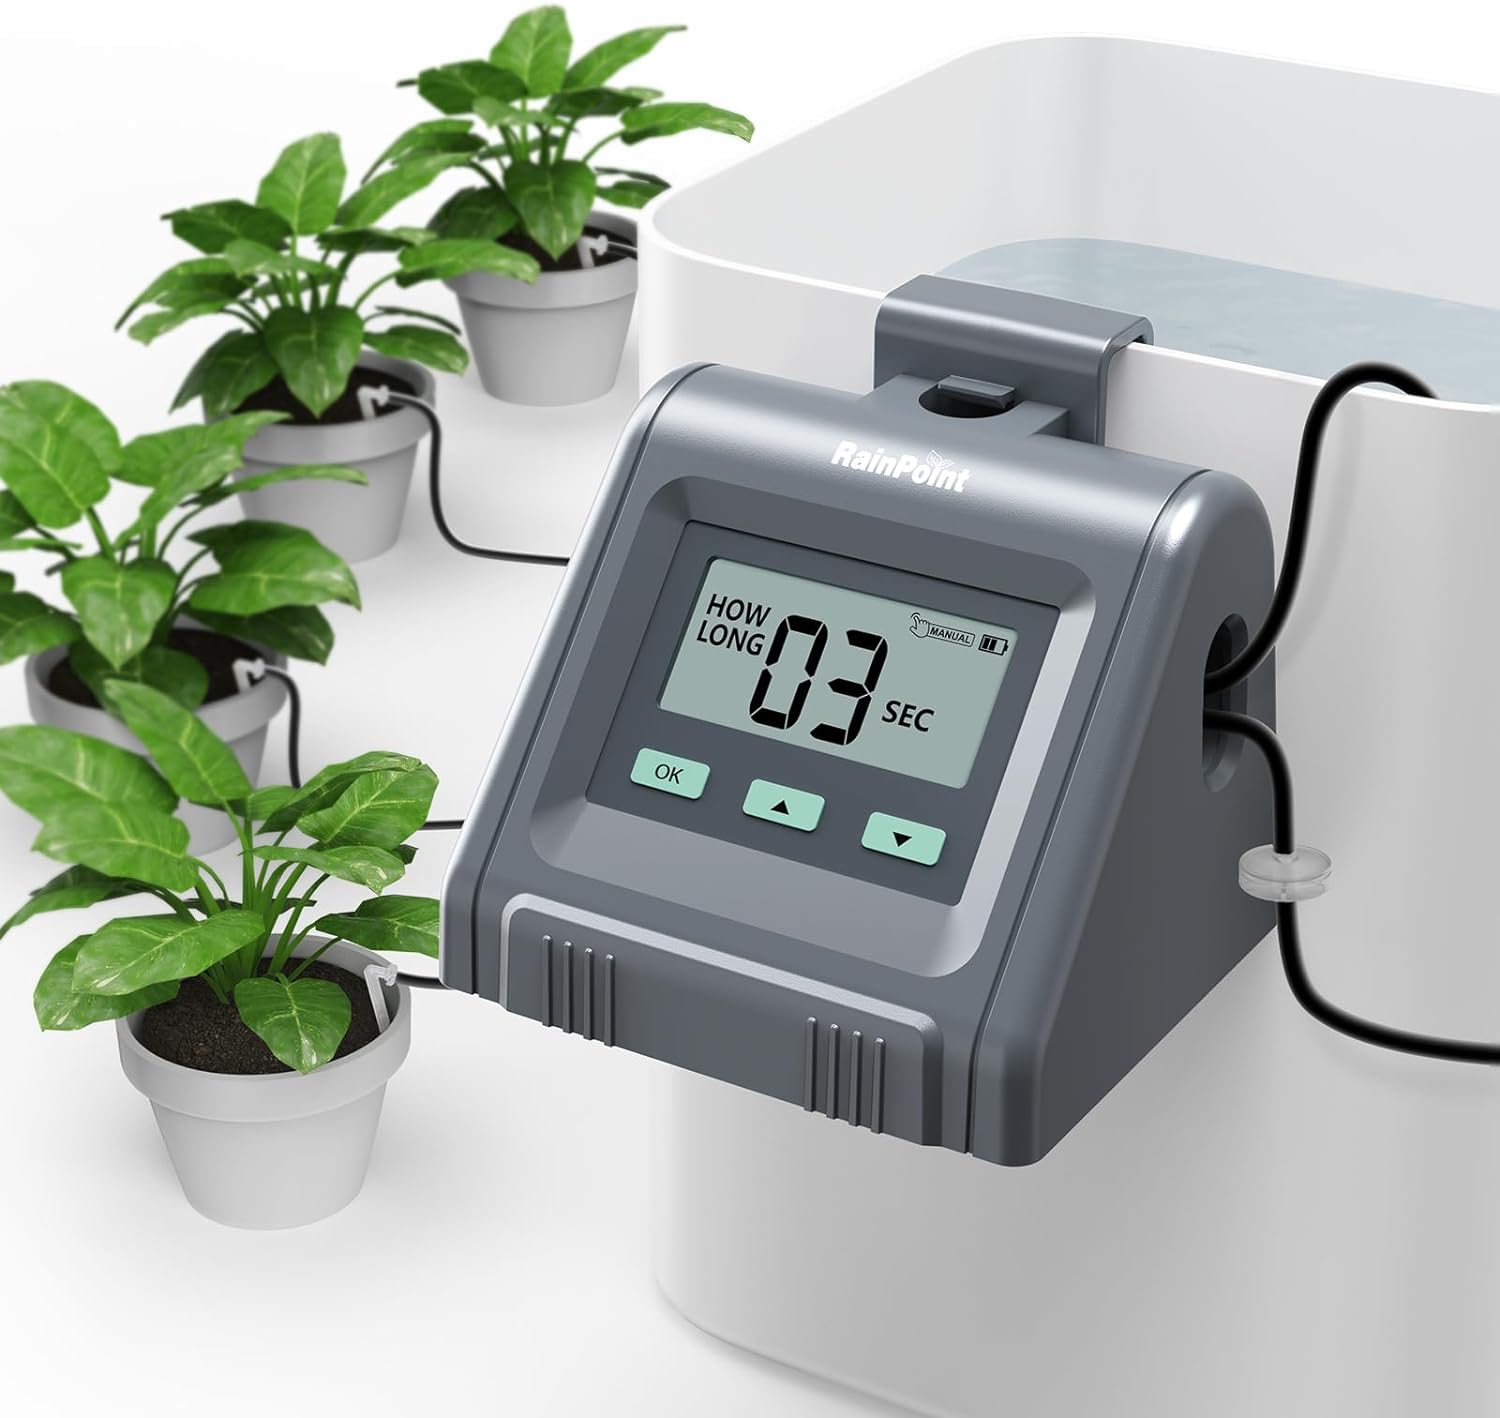 RAINPOINT WiFi Automatic Watering System